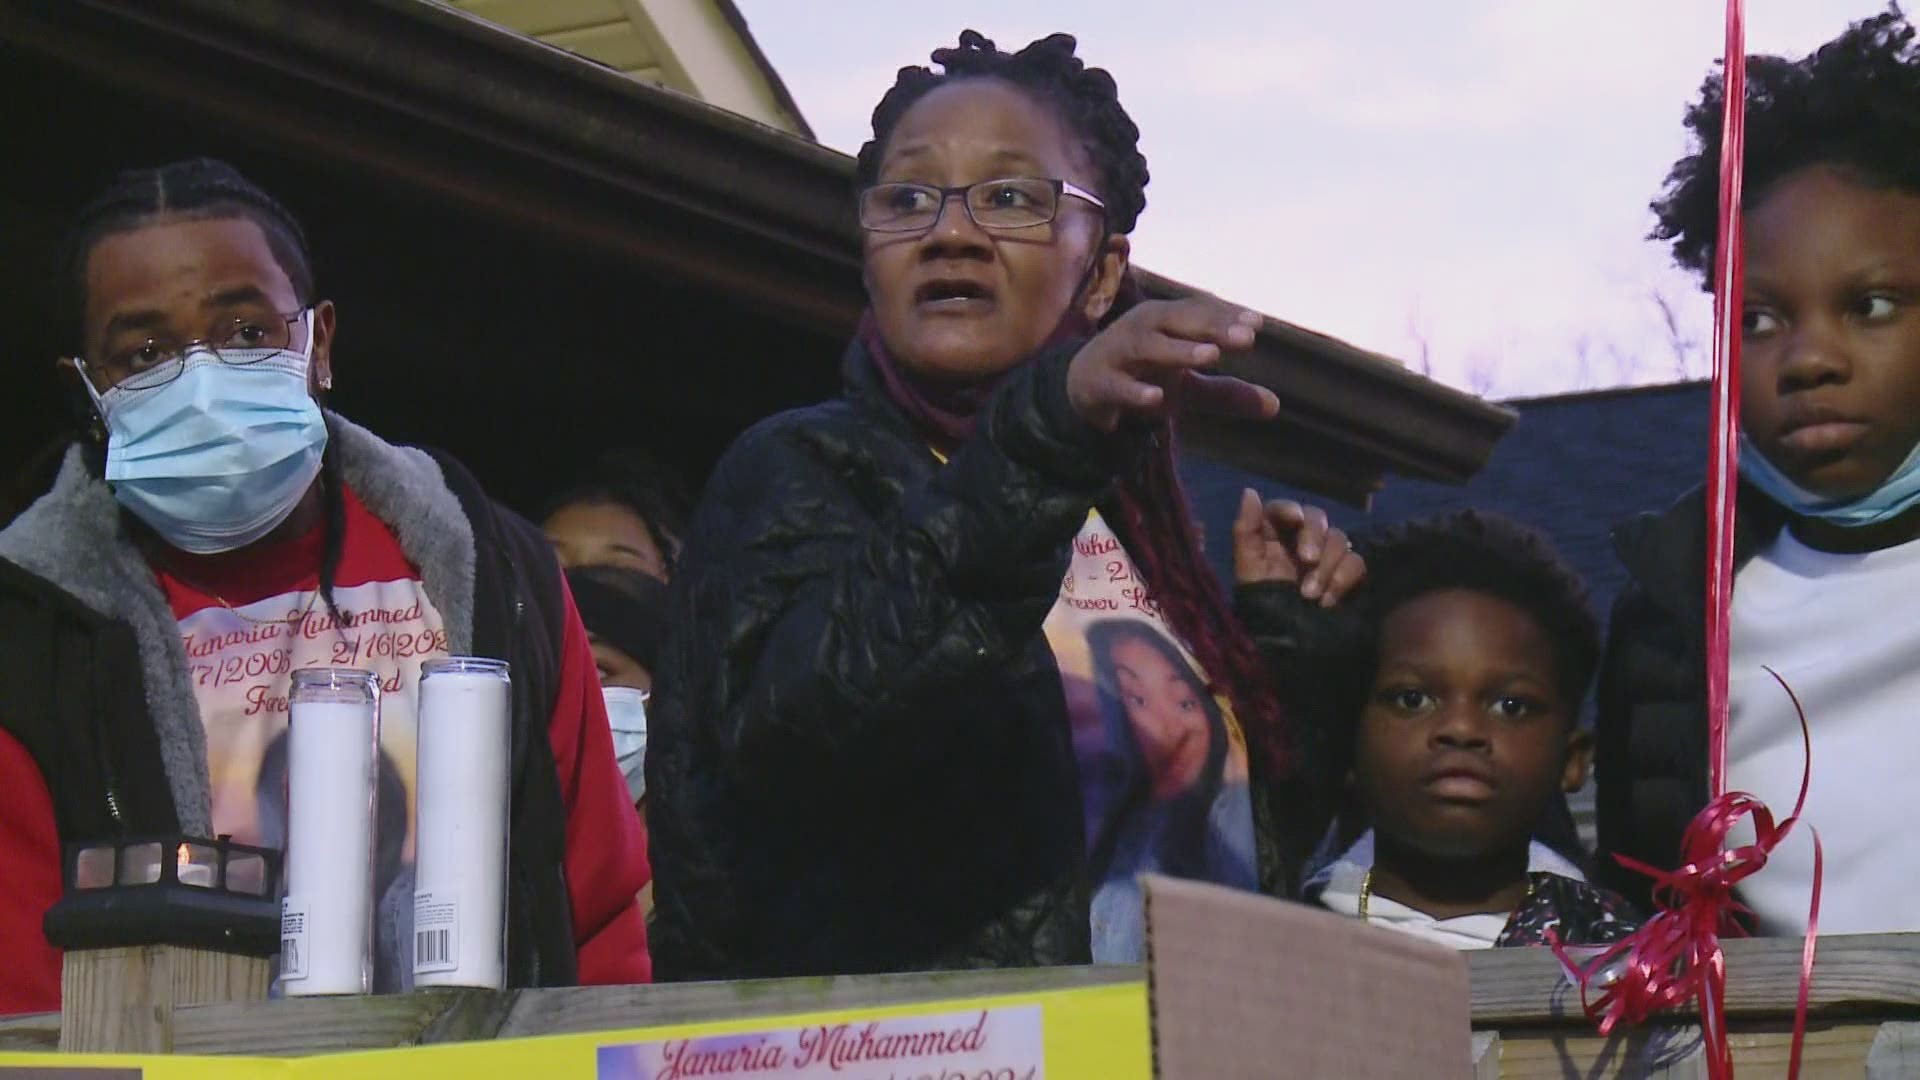 Family, friends and the community paid tribute to 15-year-old Janaria Muhammad, who was shot and killed Tuesday night.